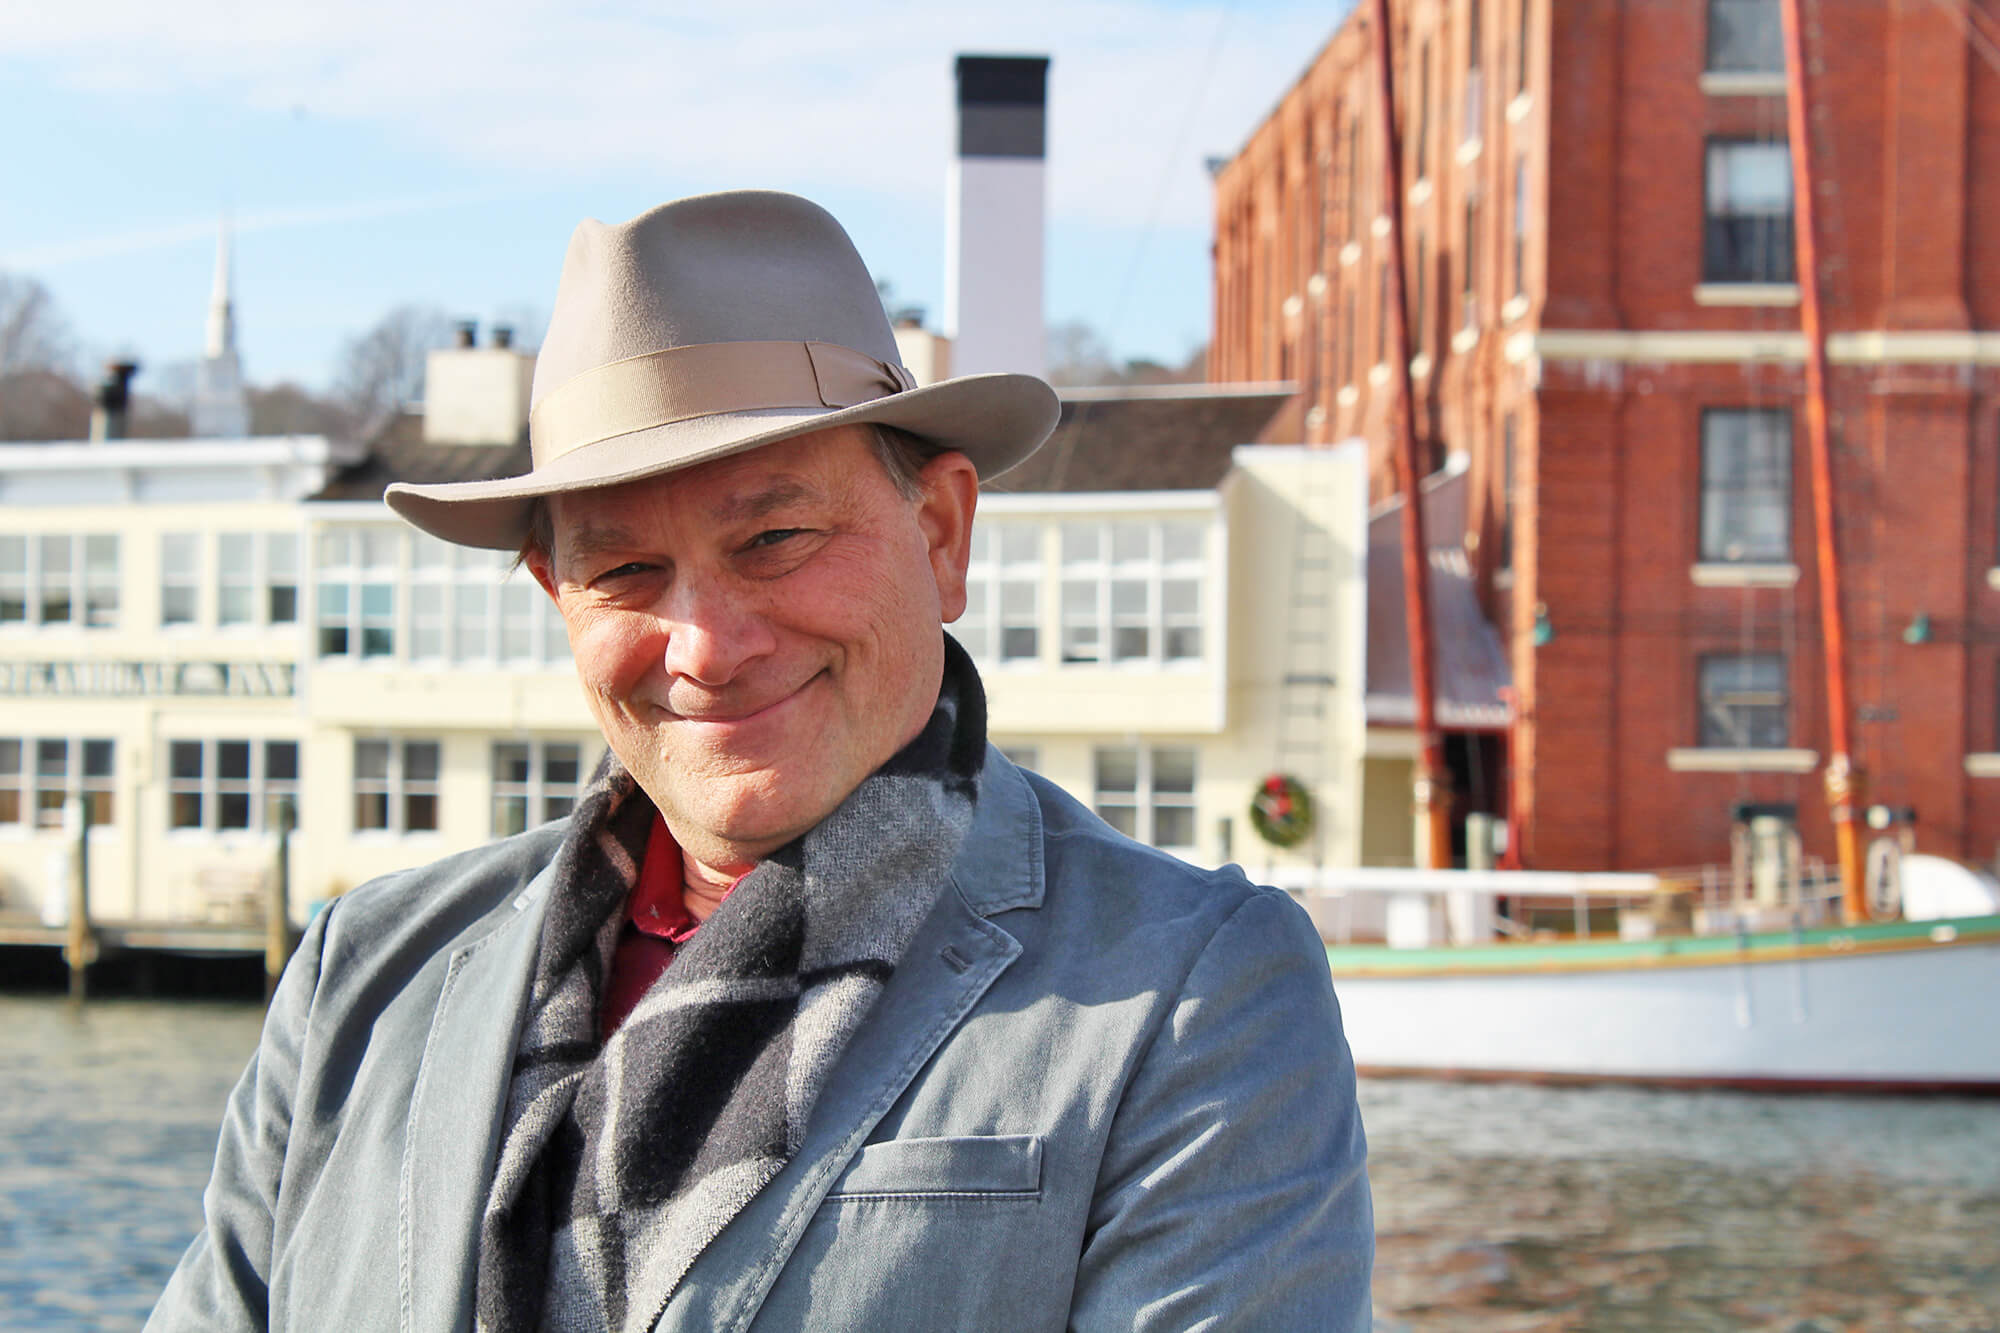 A man in a hat and jacket standing next to a building.